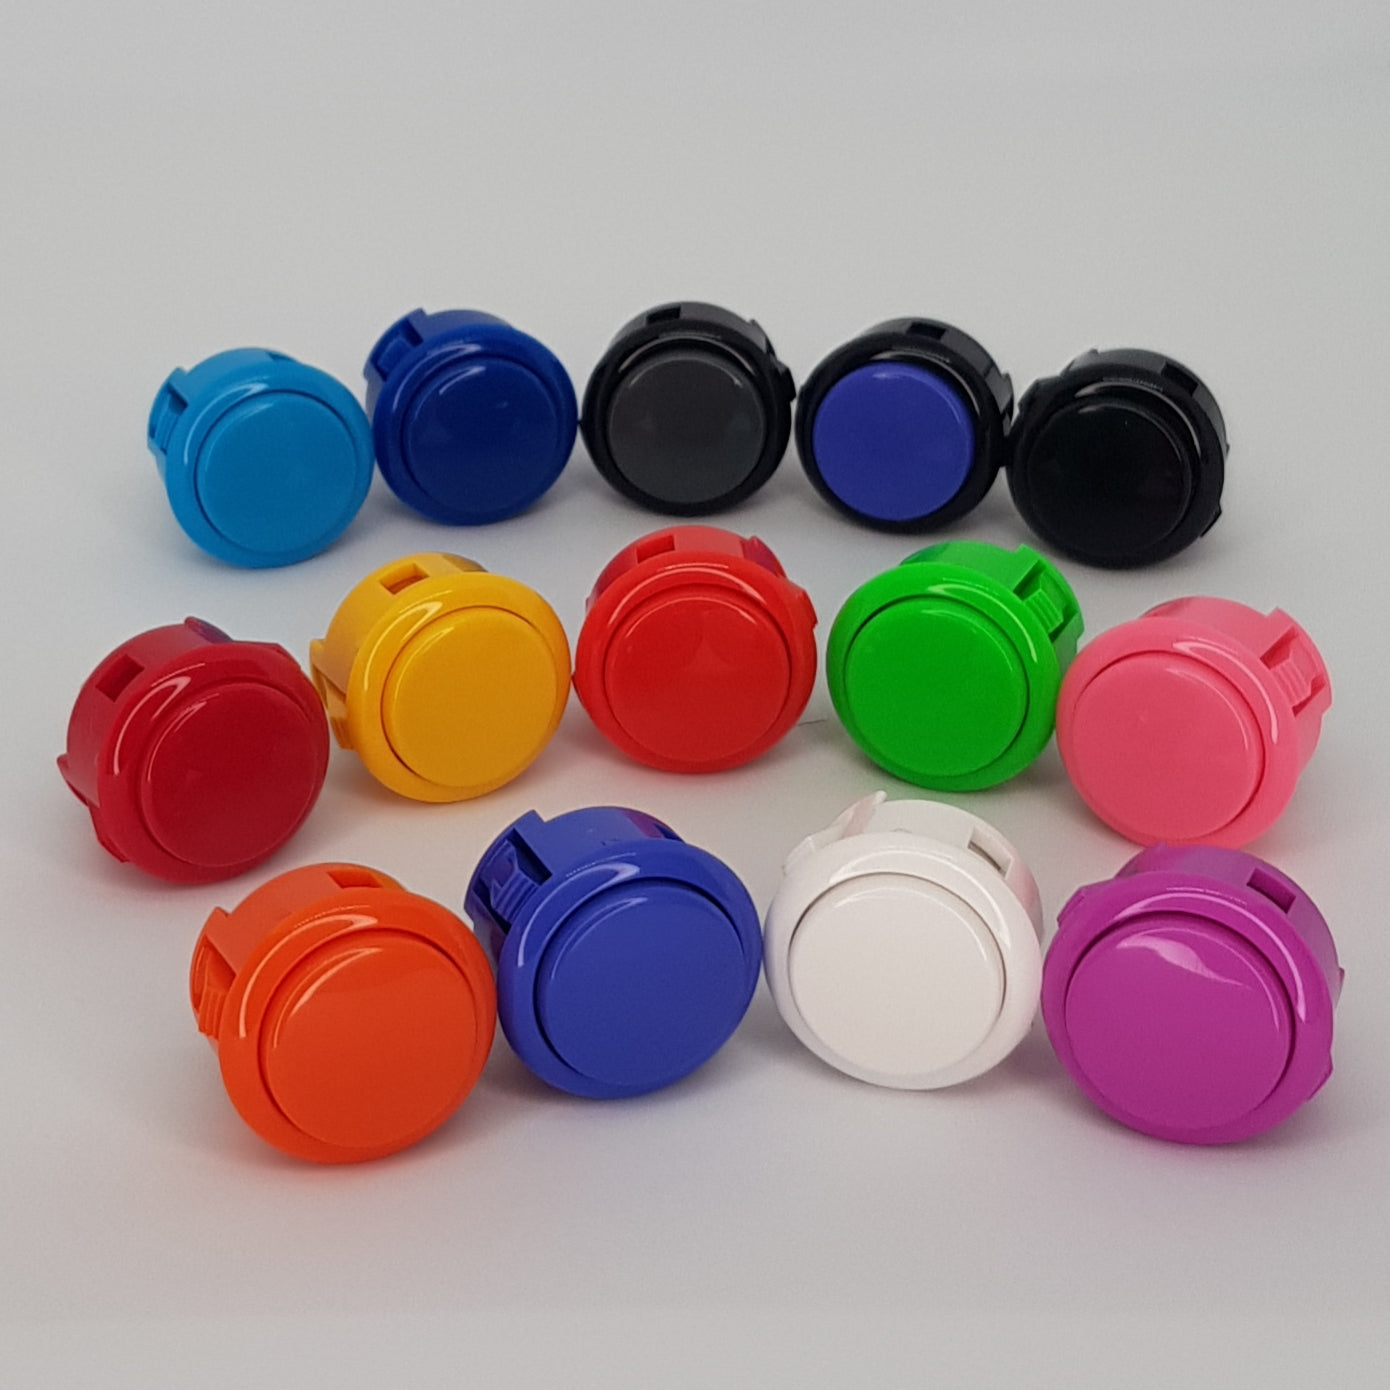 30mm Push buttons